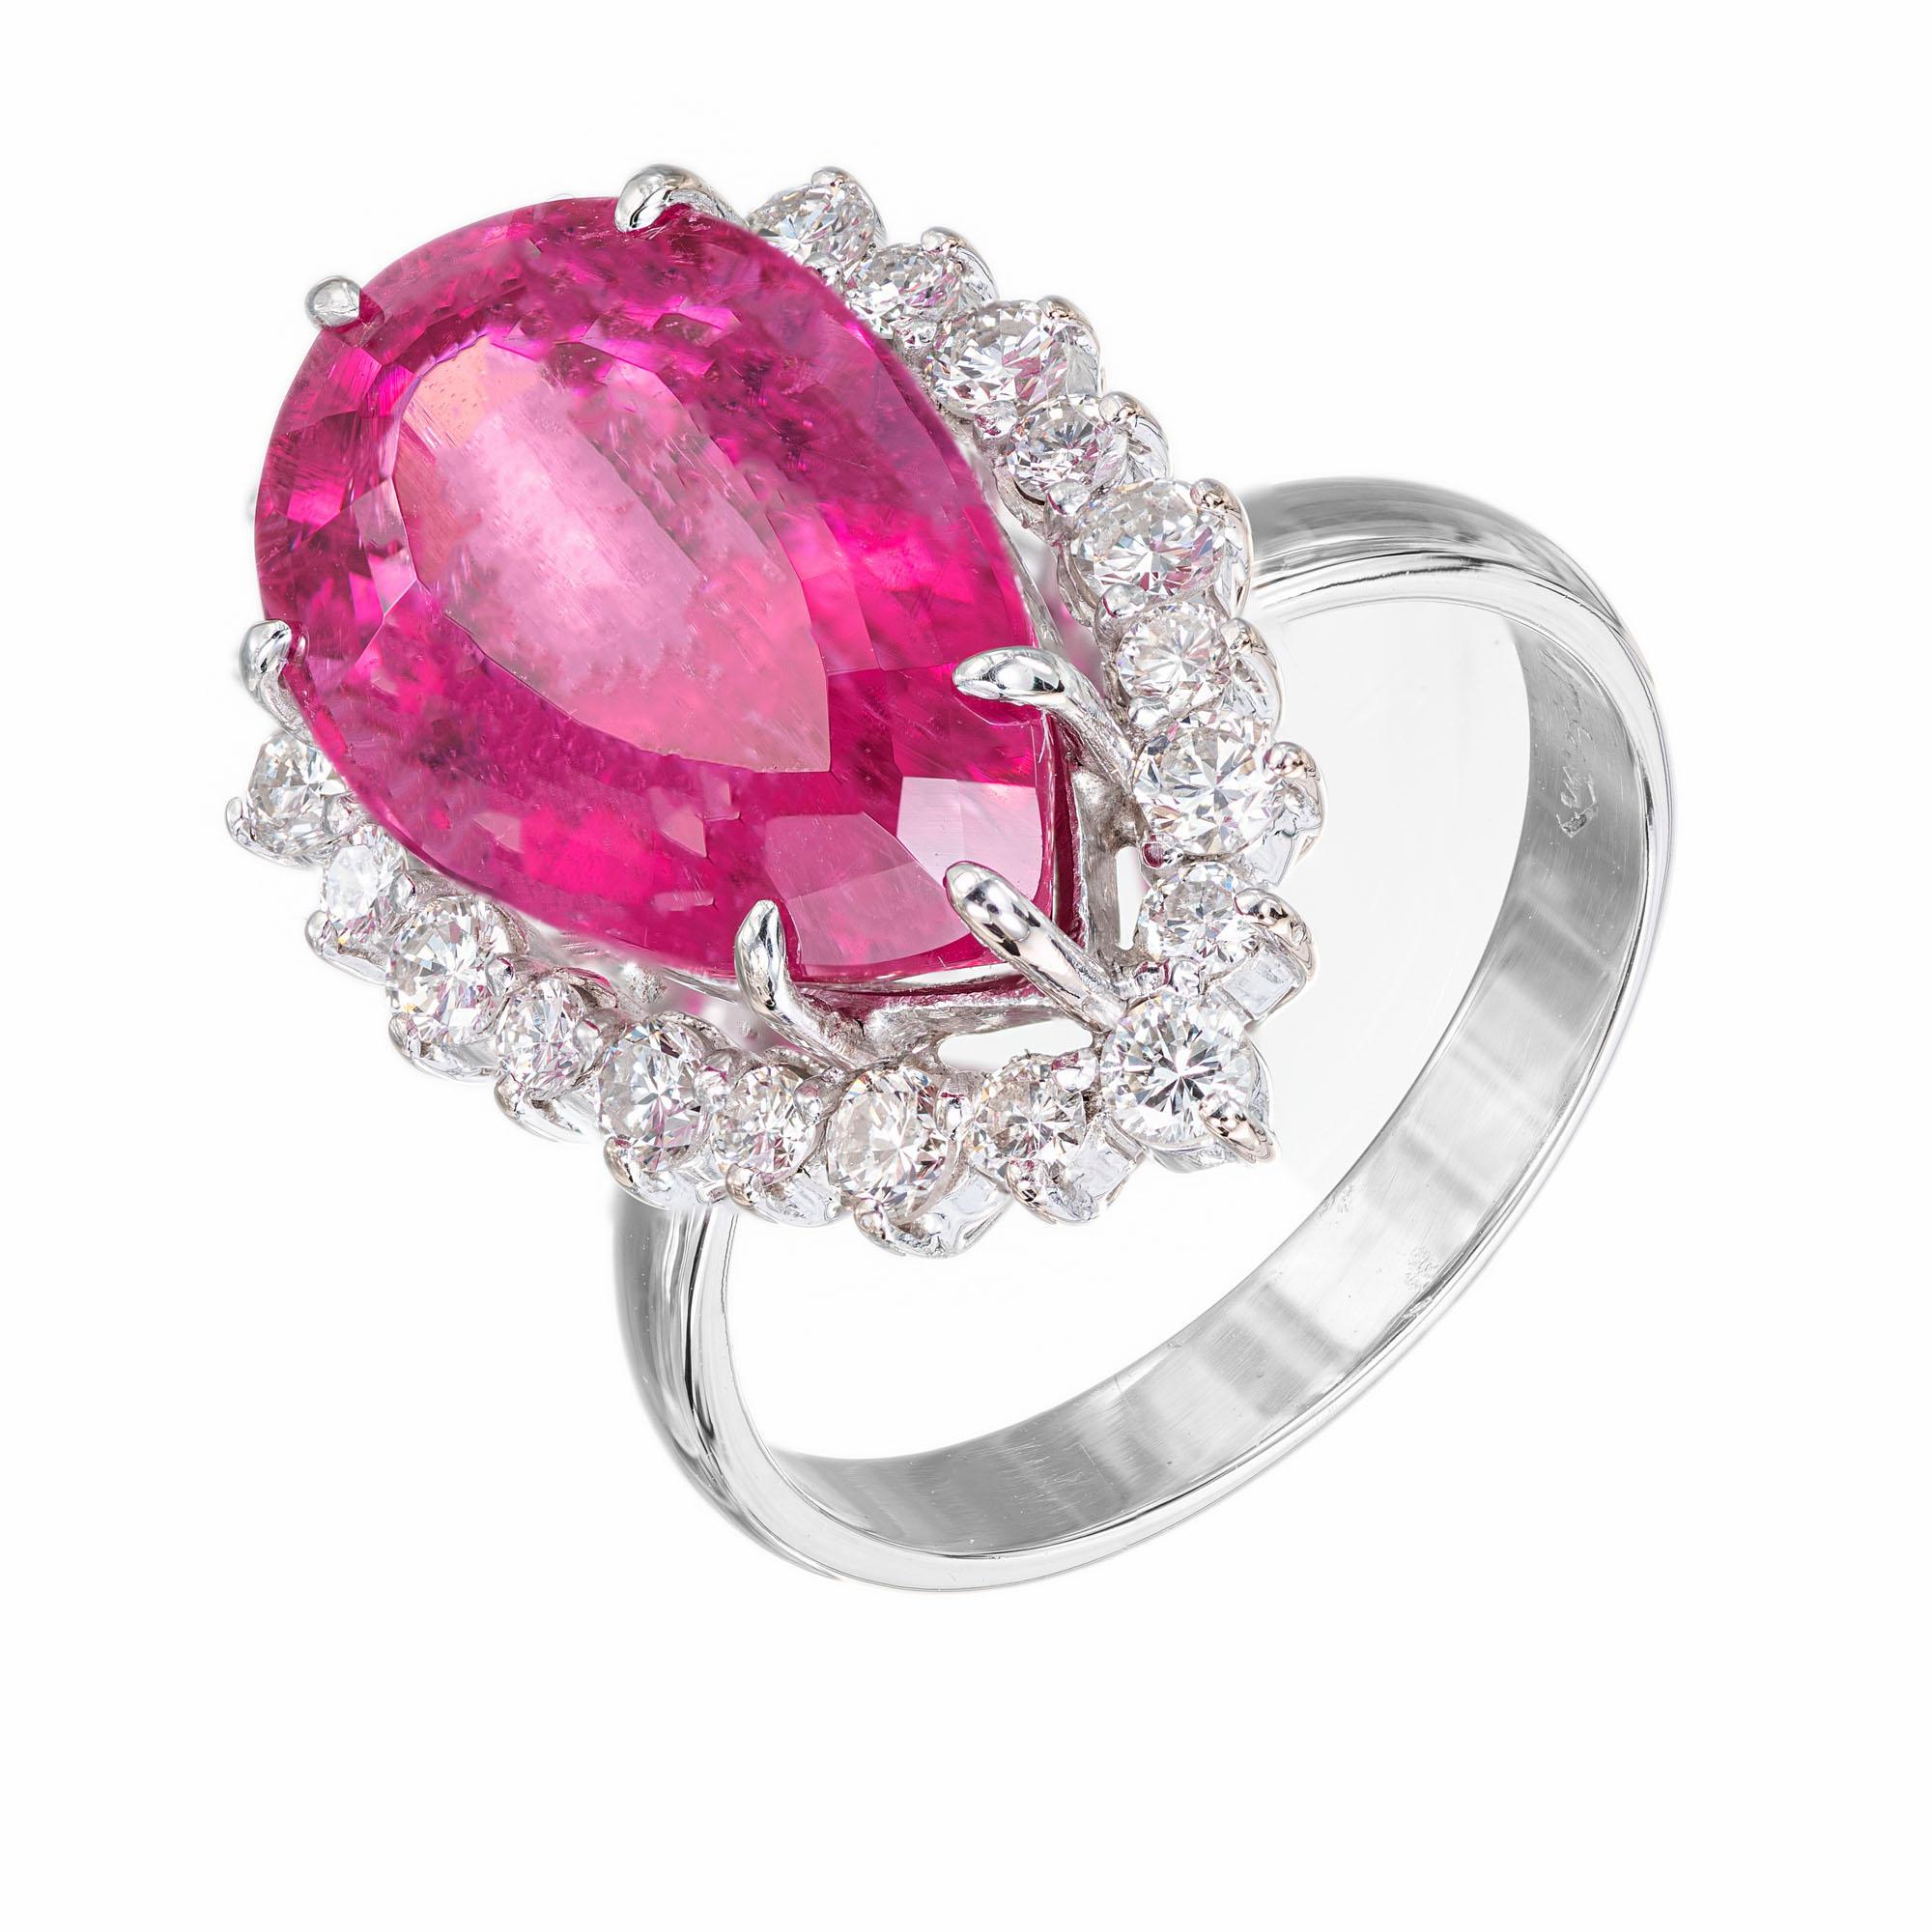 Pear shape bright pink tourmaline and diamond cocktail ring. 7.77 carat center pear shaped tourmaline, moderate inclusions with a halo of 22 round brilliant cut diamonds in a 14k white gold setting.  

1 pear shape pink tourmaline, MI approx.